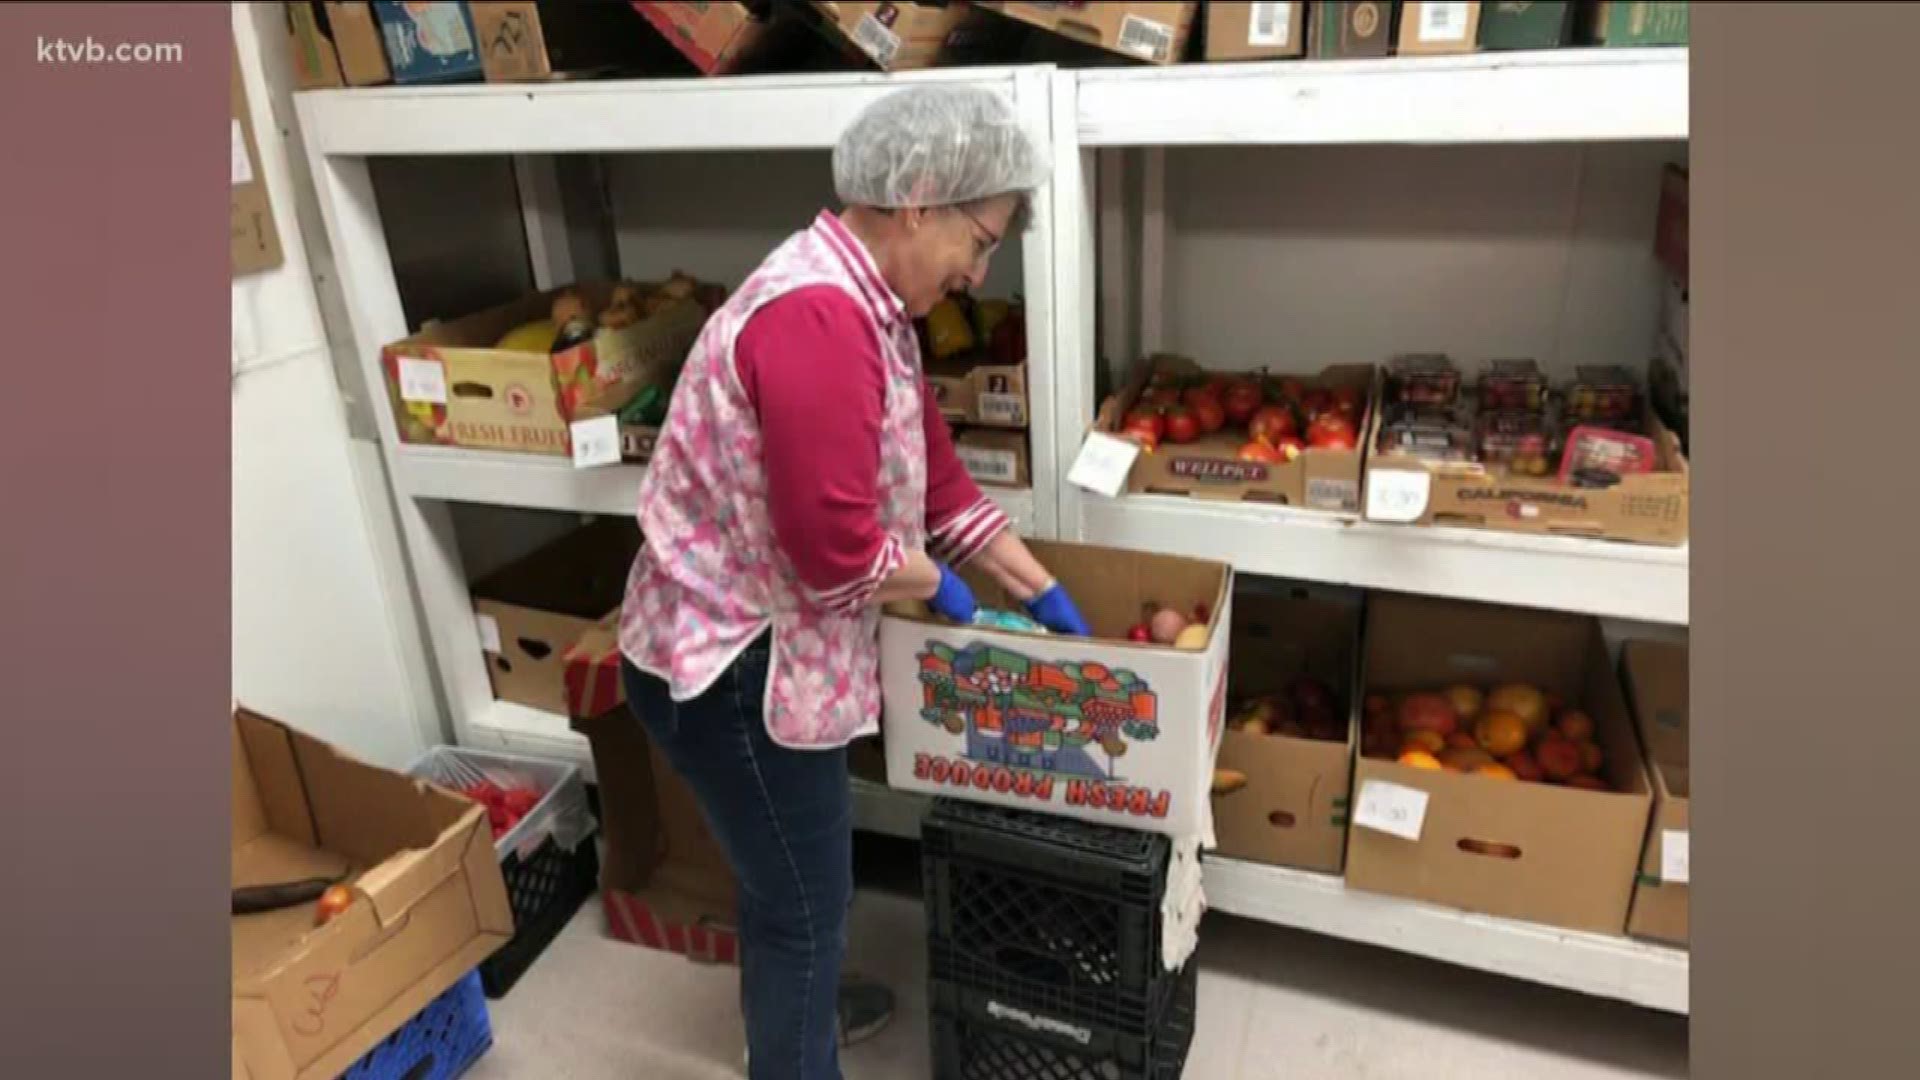 Of the people served last week, 62 were turning to the foodbank for the very first time.